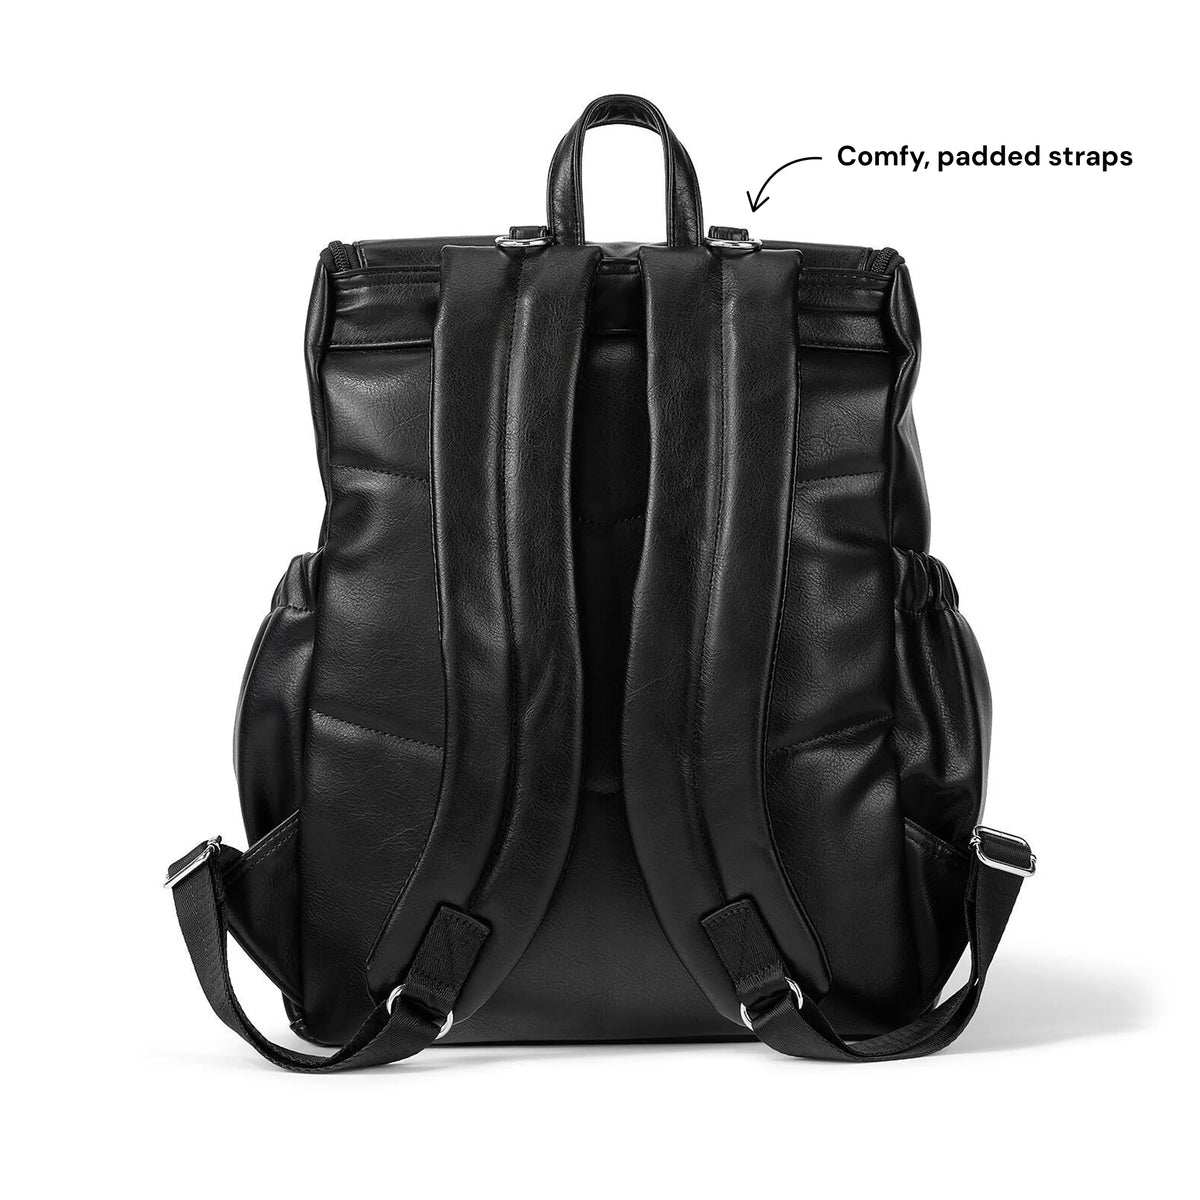 OiOi Signature Nappy Backpack Faux Leather - Black